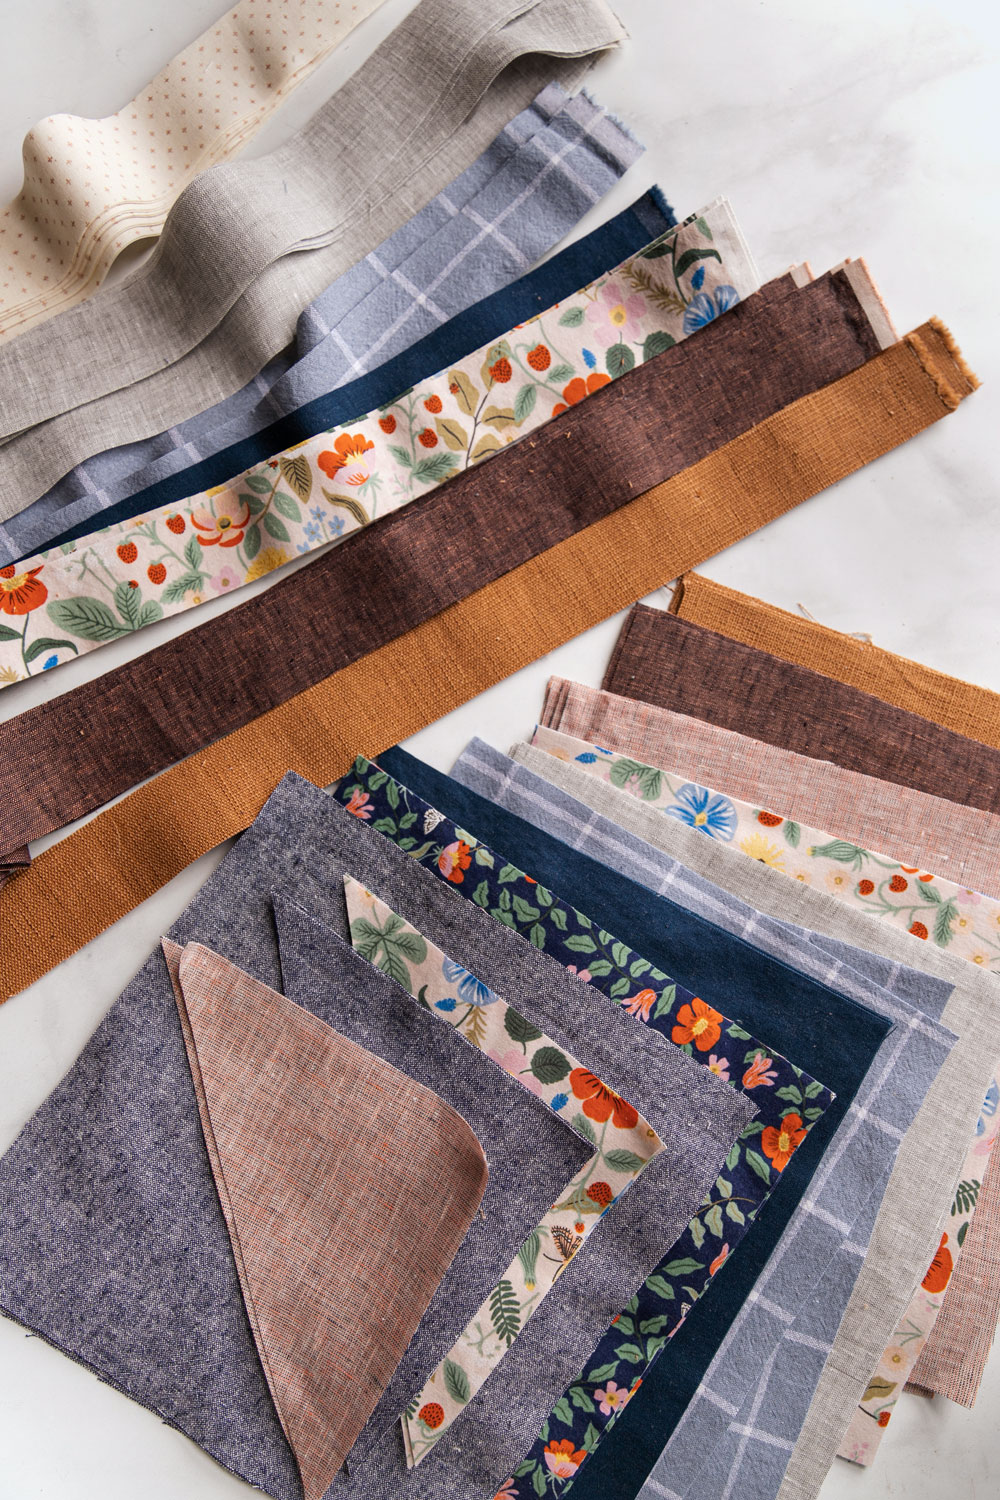 The Gather quilt sew along is an online quilting community experience! We will make this modern quilt pattern together – one week at a time. suzyquilts.com #quiltalong #quiltpattern